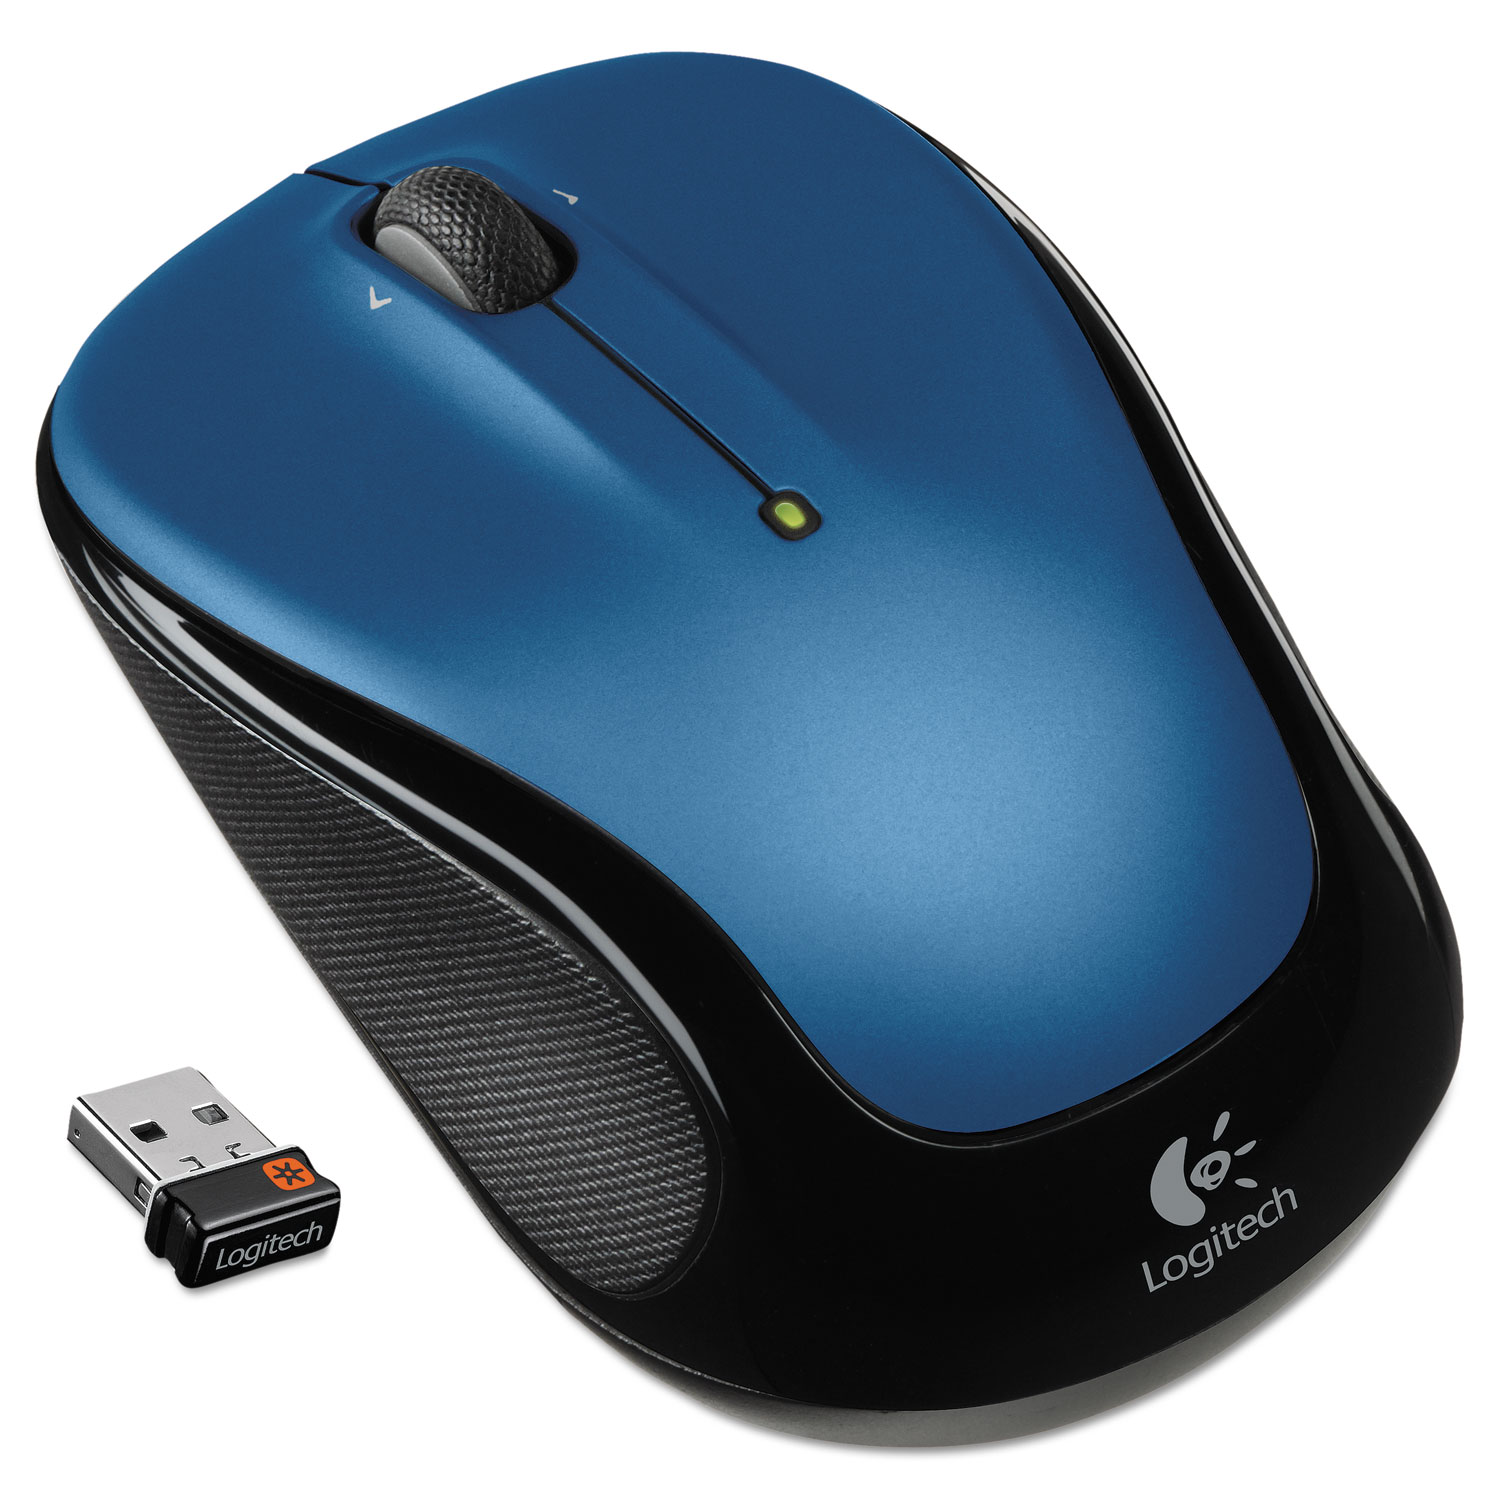  Logitech 910-002650 M325 Wireless Mouse, 2.4 GHz Frequency/30 ft Wireless Range, Left/Right Hand Use, Blue (LOG910002650) 